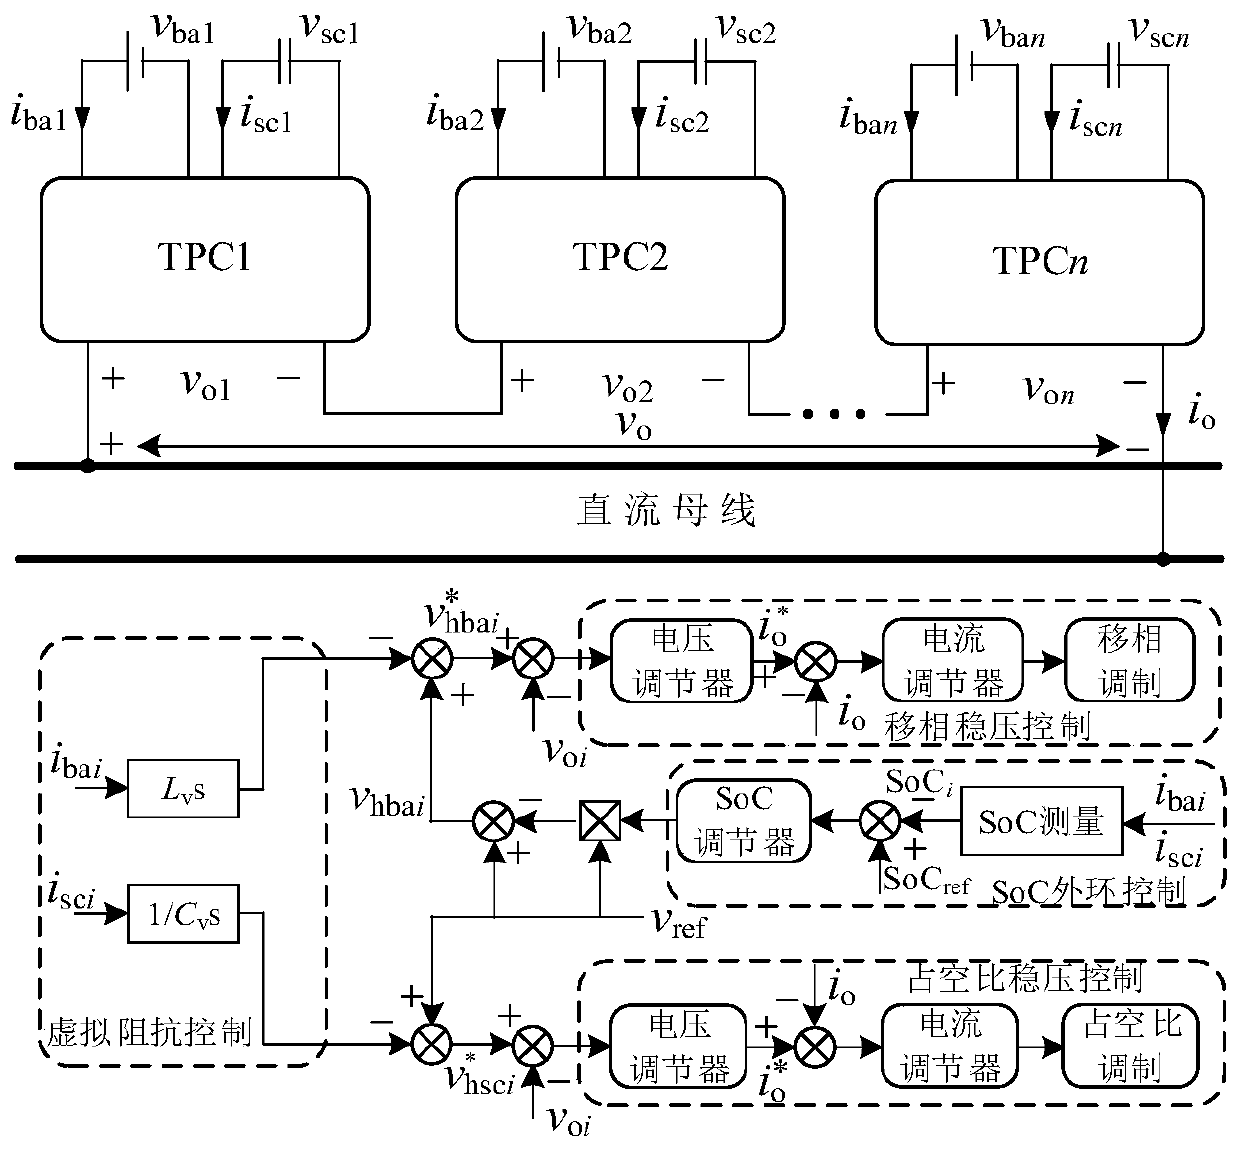 SoC (State of Charge) balance control method of serial mixed energy storage three-port converter